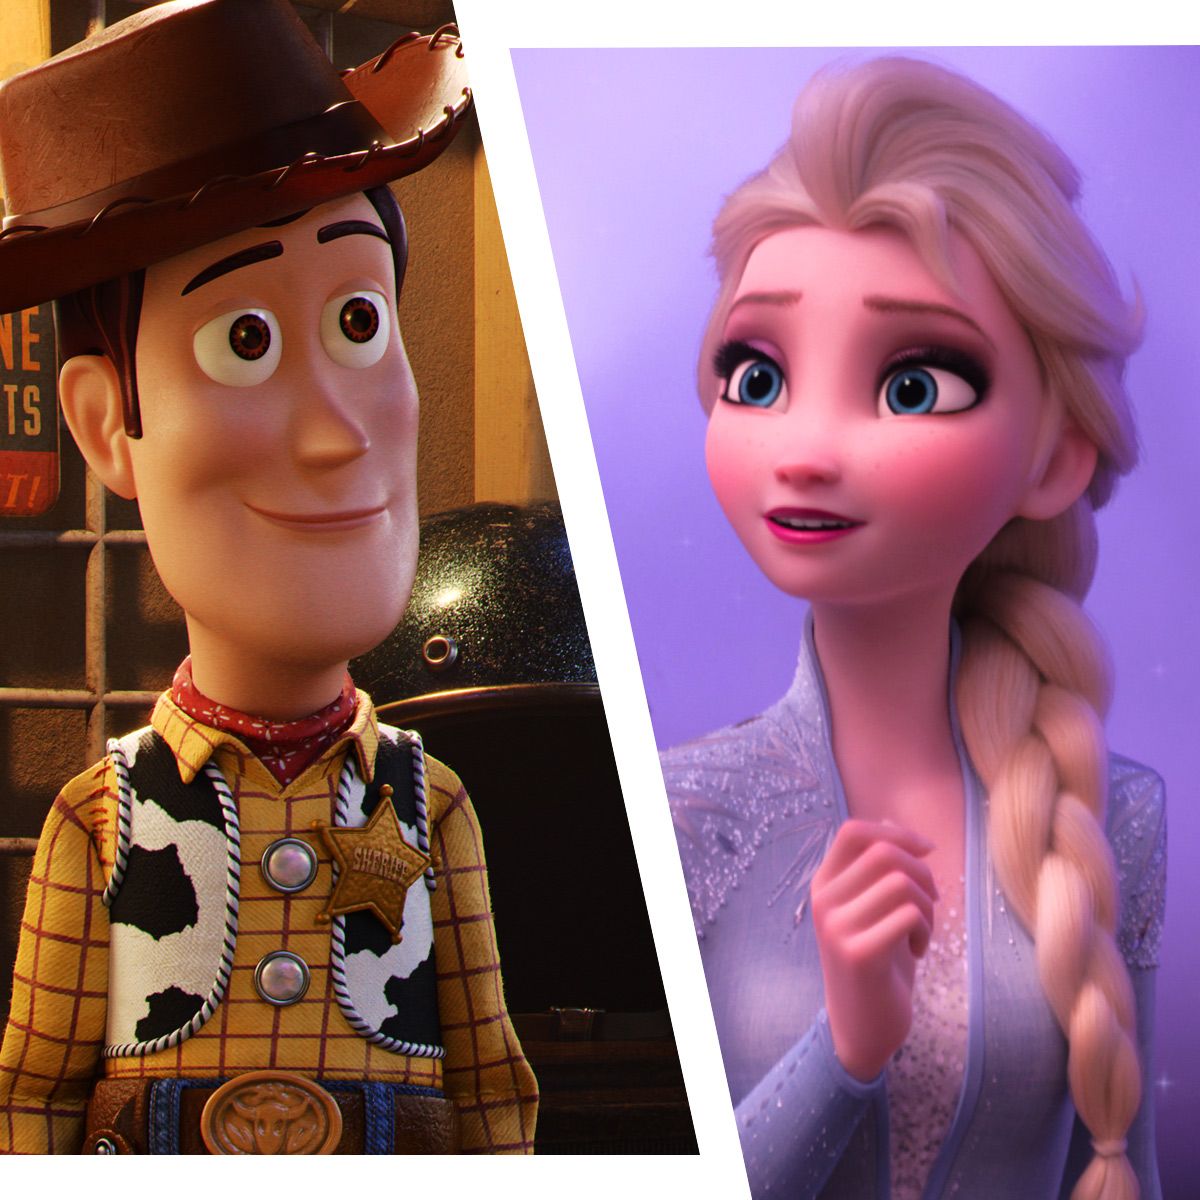 Toy Story 5 and Frozen 3 officially confirmed by Disney - Limerick's Live 95